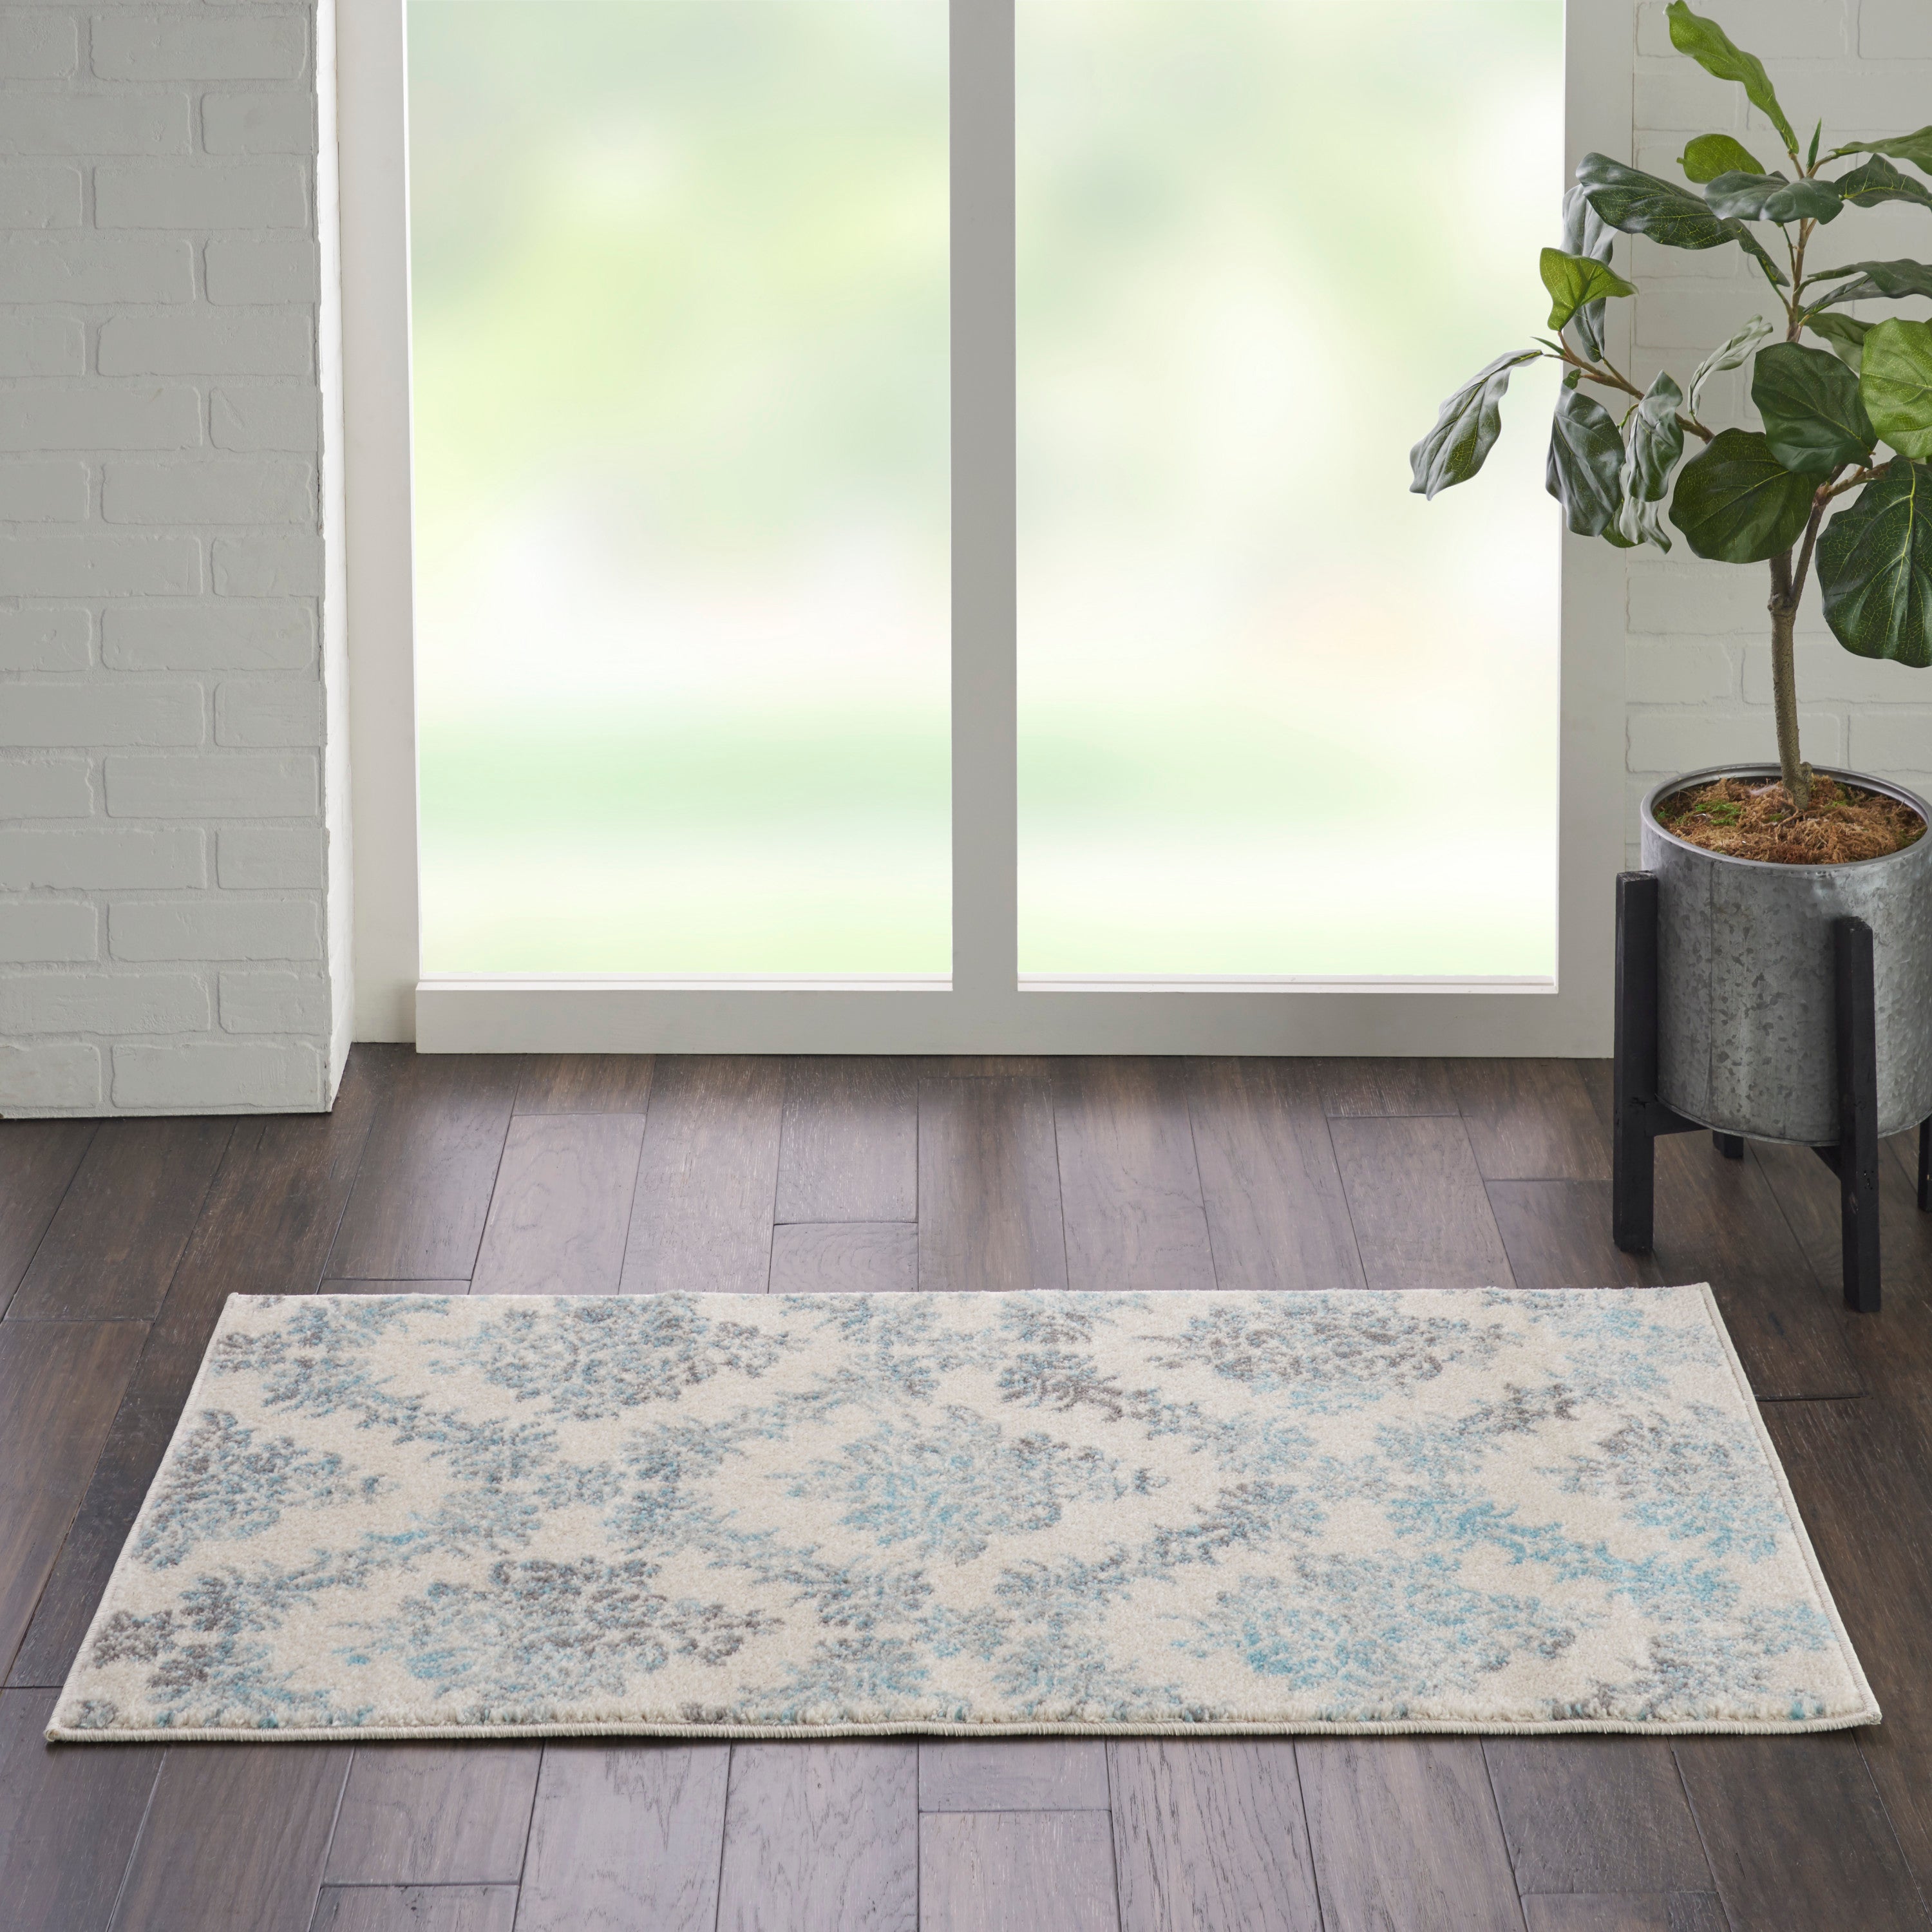 Nourison Tranquil TRA09 Ivory/Turquoise Area Rug